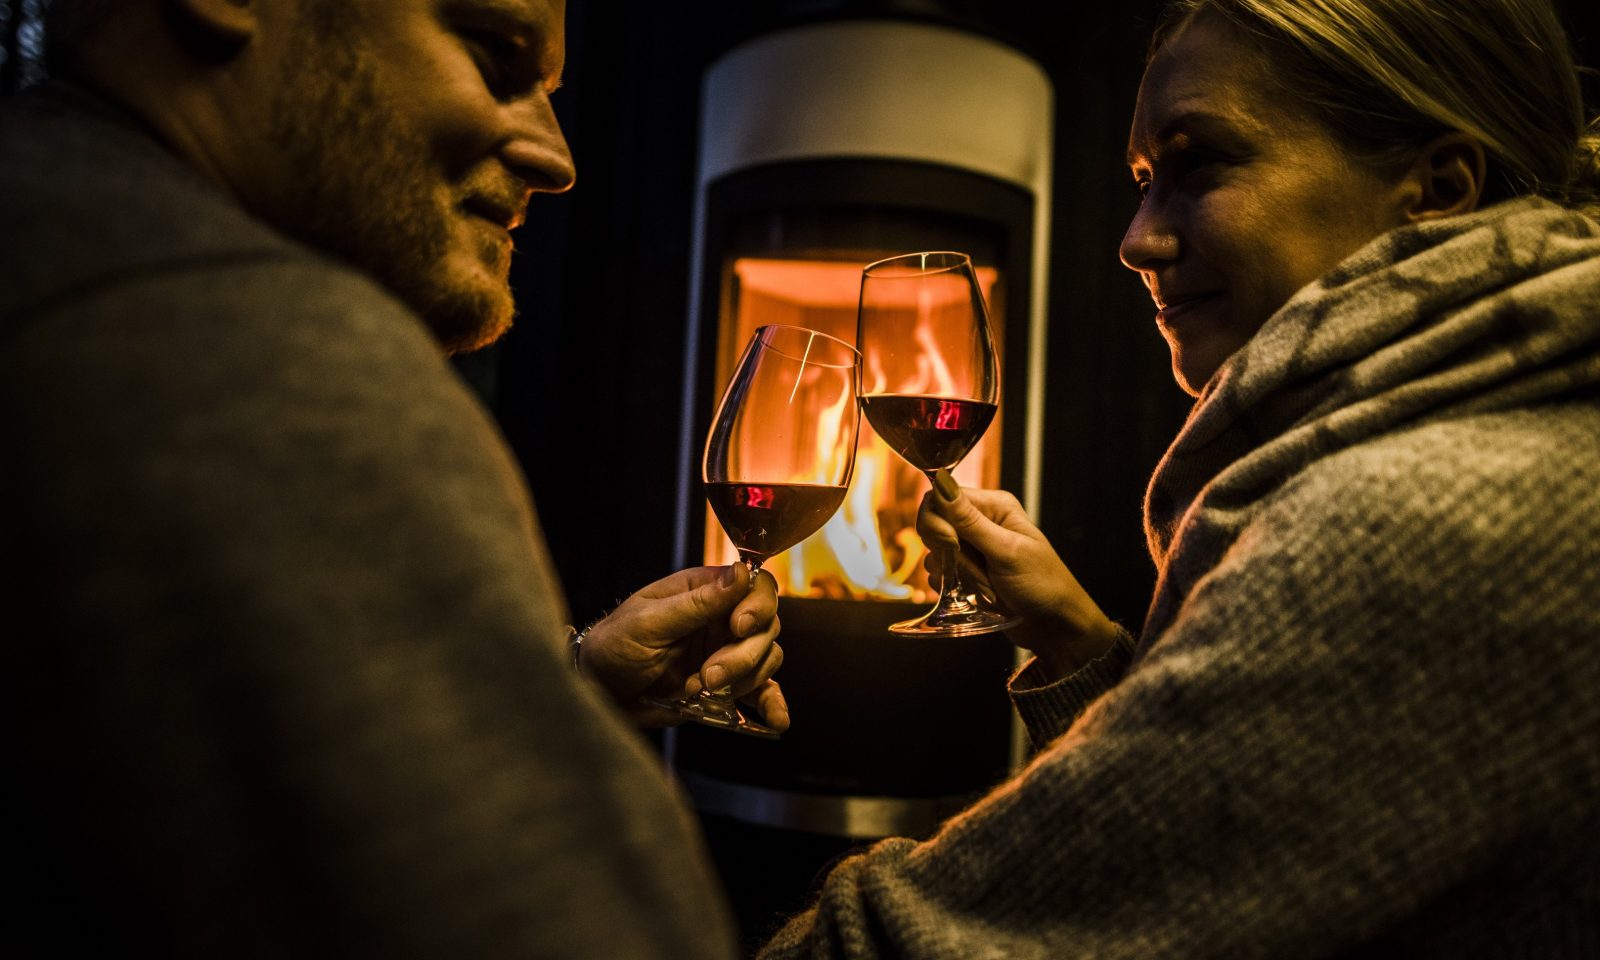 Couple enjoying red wine and warmth of fireplace in arctic scene executive suite.